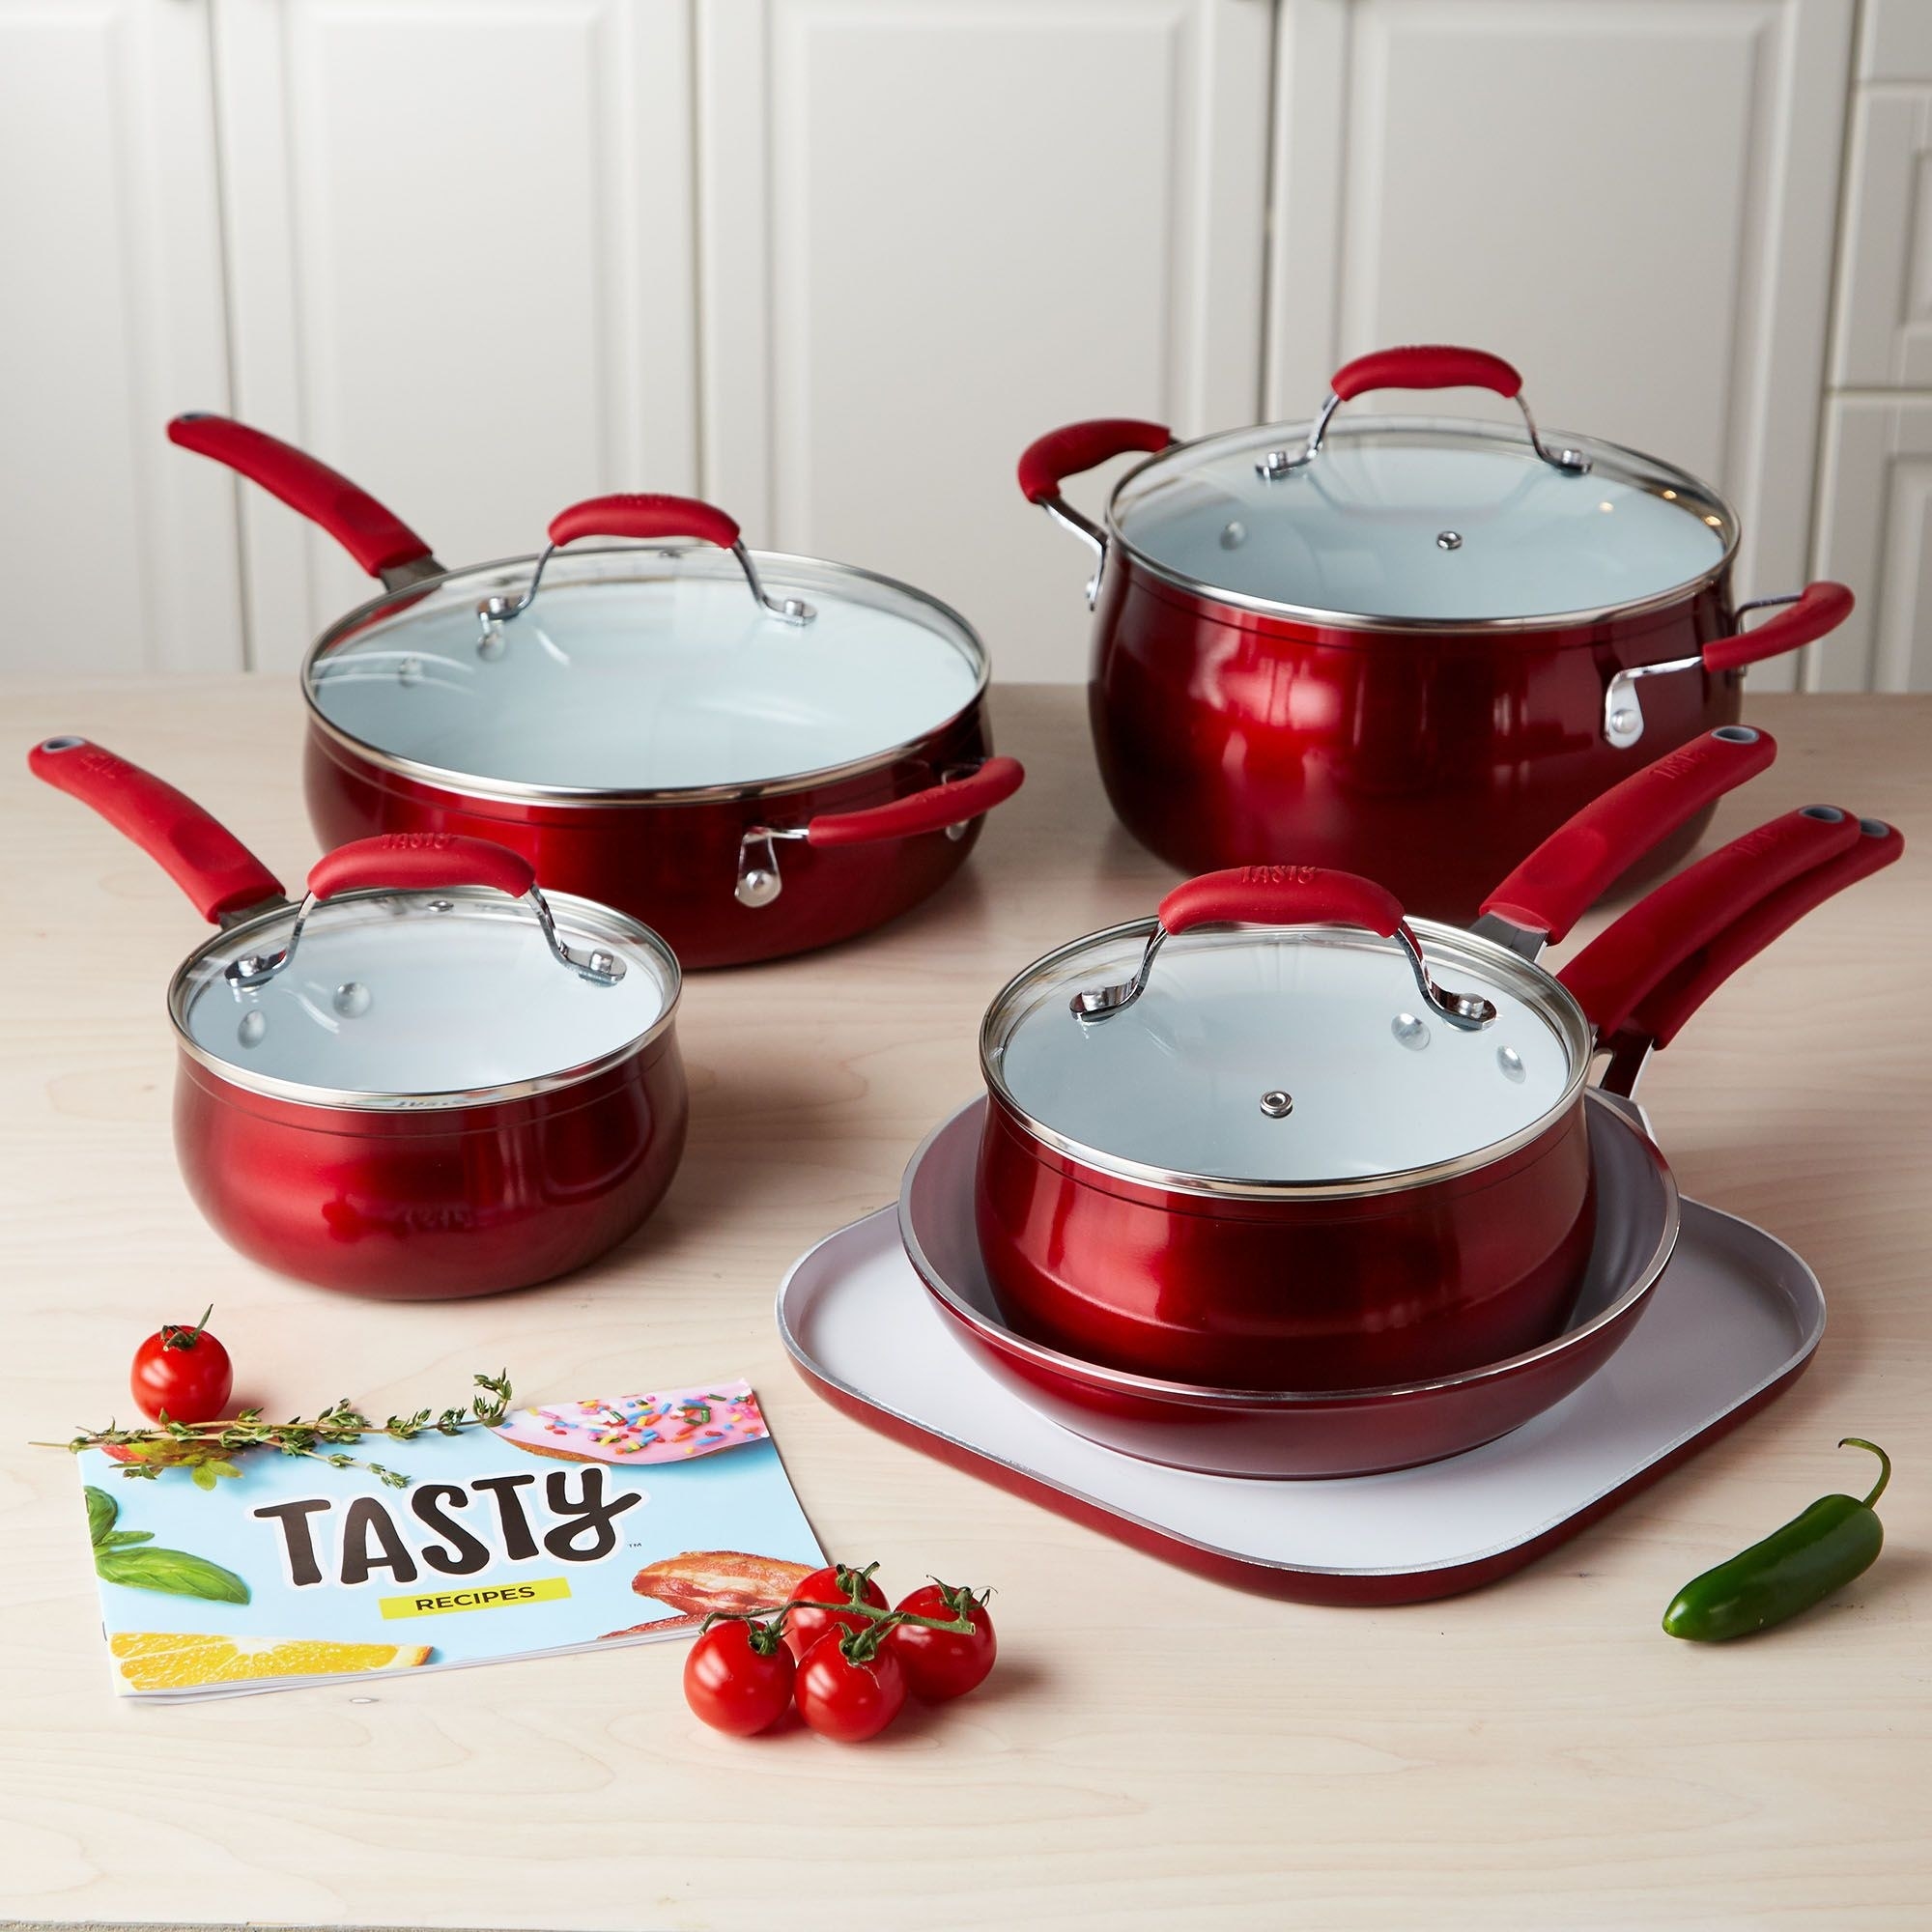 Australia Get Ready To Cook Like A Tasty Pro Because Big W Just Scored The Whole Kitchen Range